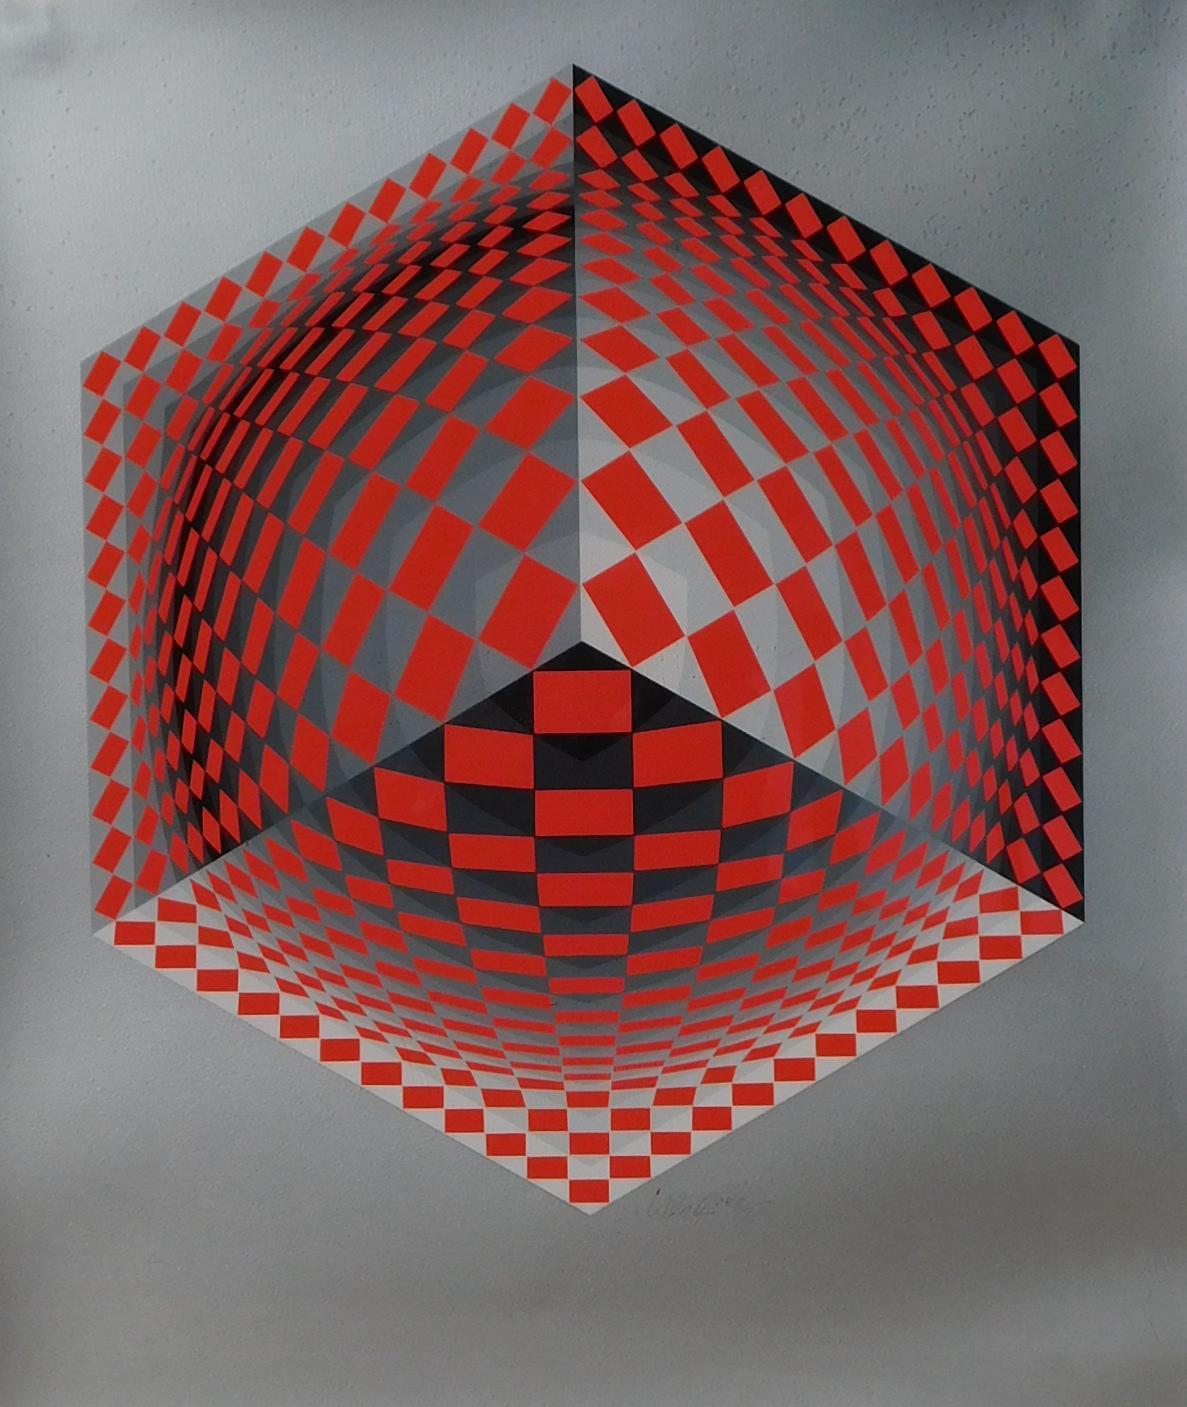 Bold geometric op art original serigraph with red check design on silver wove paper 
by Victor Vasarely (Hungarian-French, 1906-1997). 
Edition limited to 250 plus 30 AP’s printed in 15 colors on Arches paper, 1981. 
Hand Signed by the artist